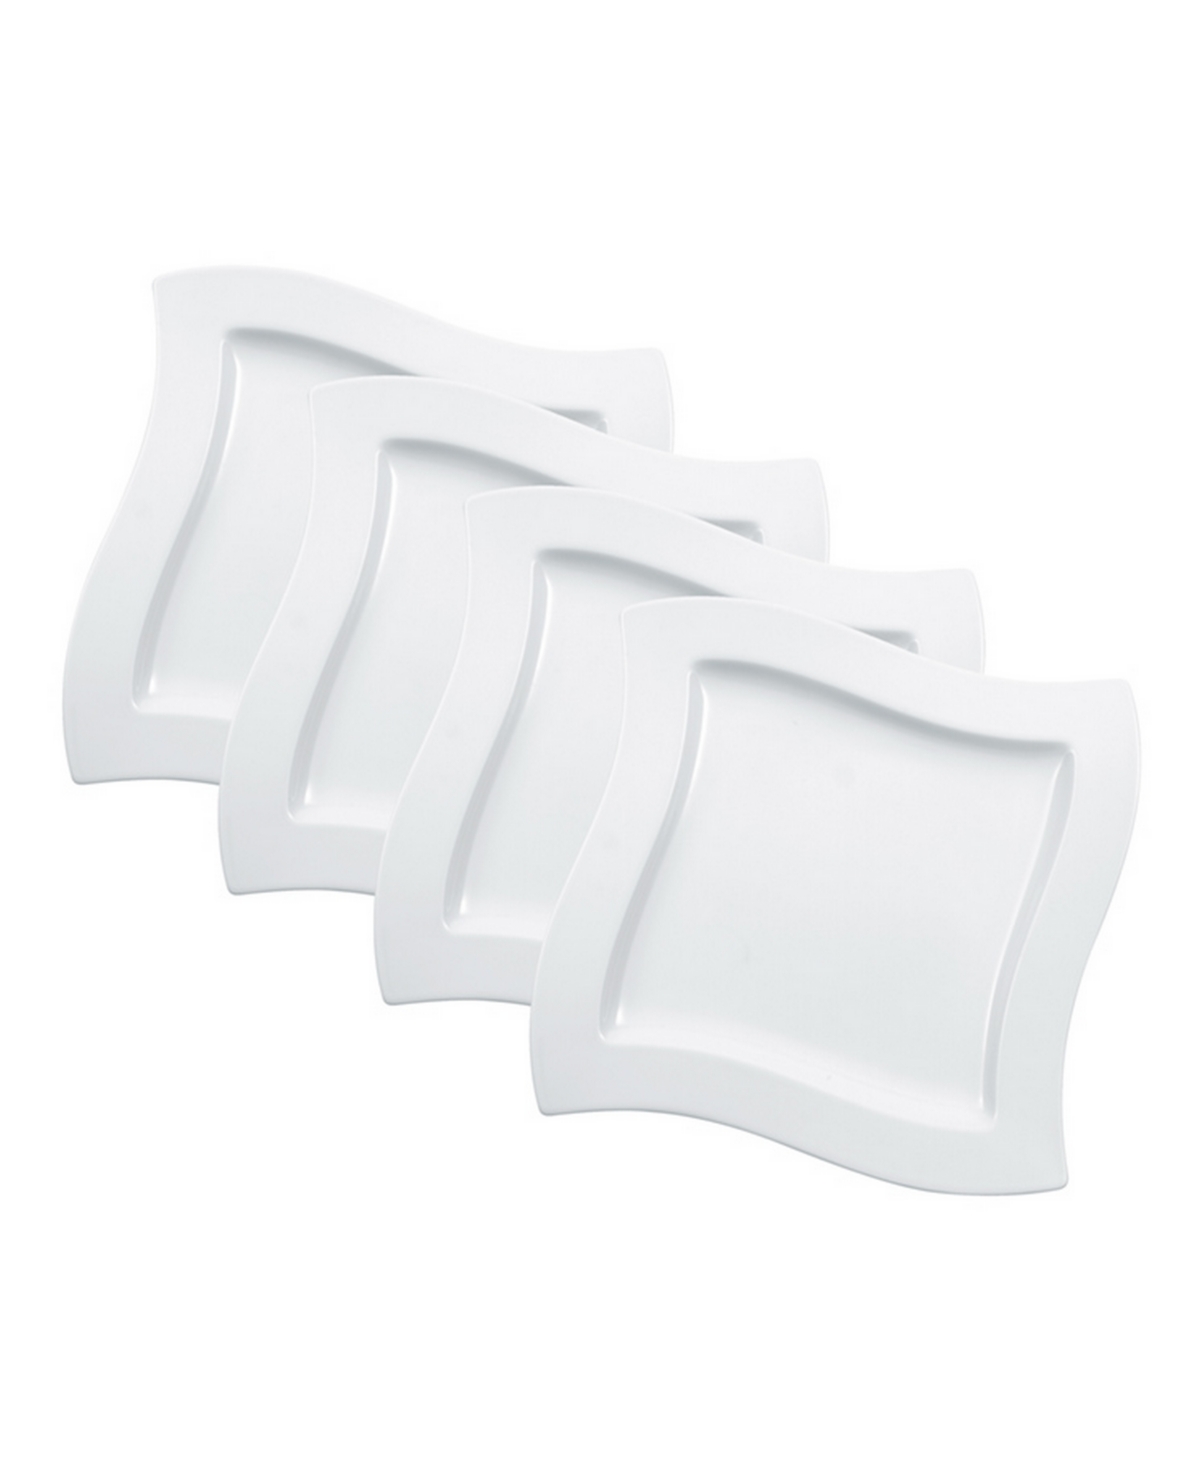 New Wave Square Set/4 Salad Plate - White